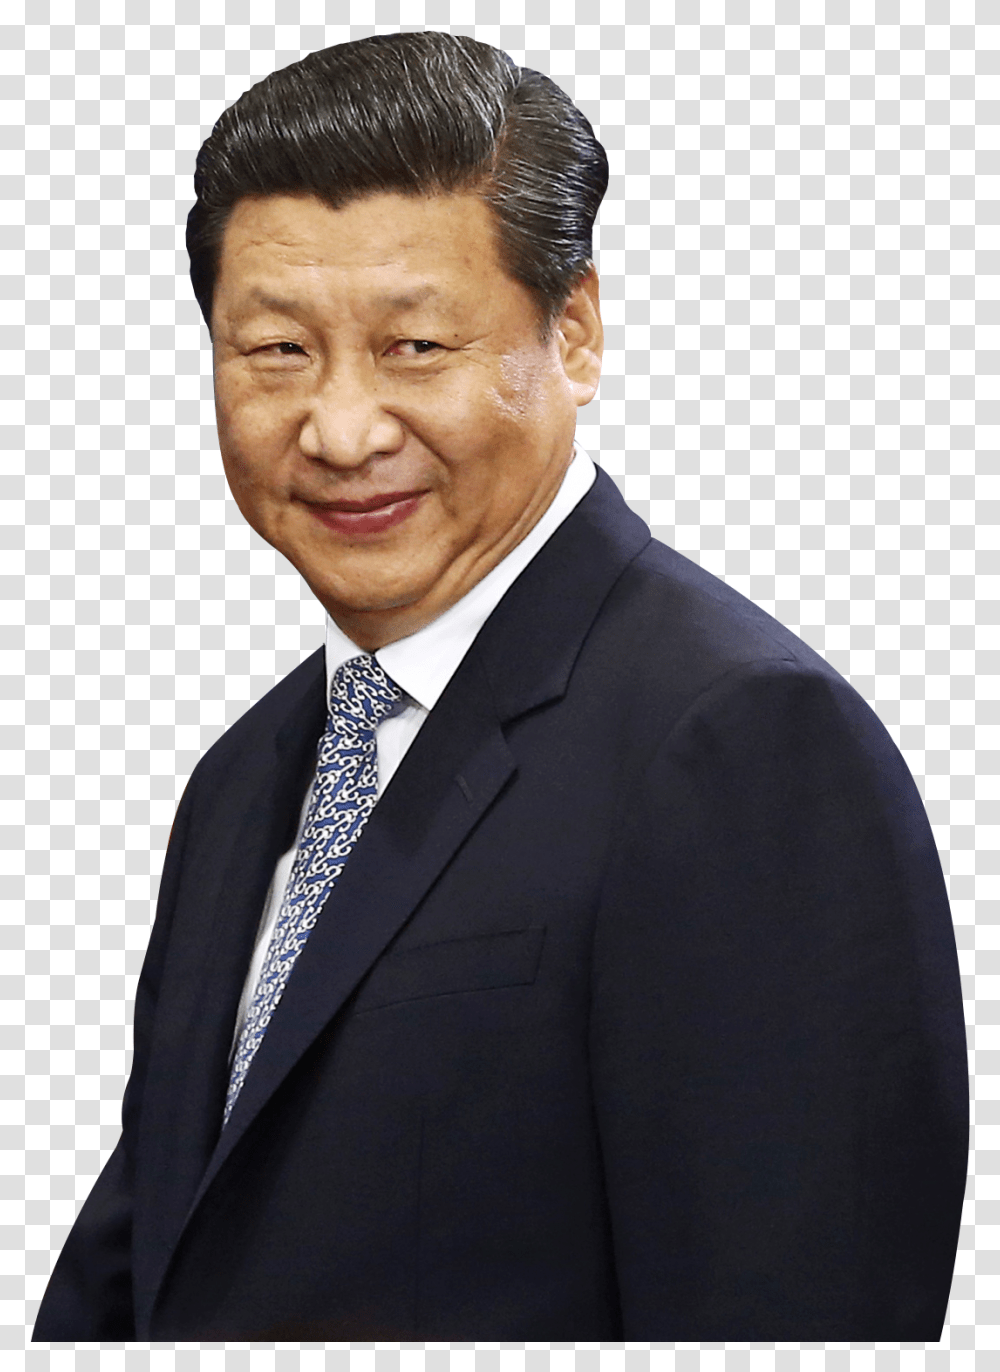 Gareth Bale Image China President For Life, Tie, Accessories, Suit, Overcoat Transparent Png